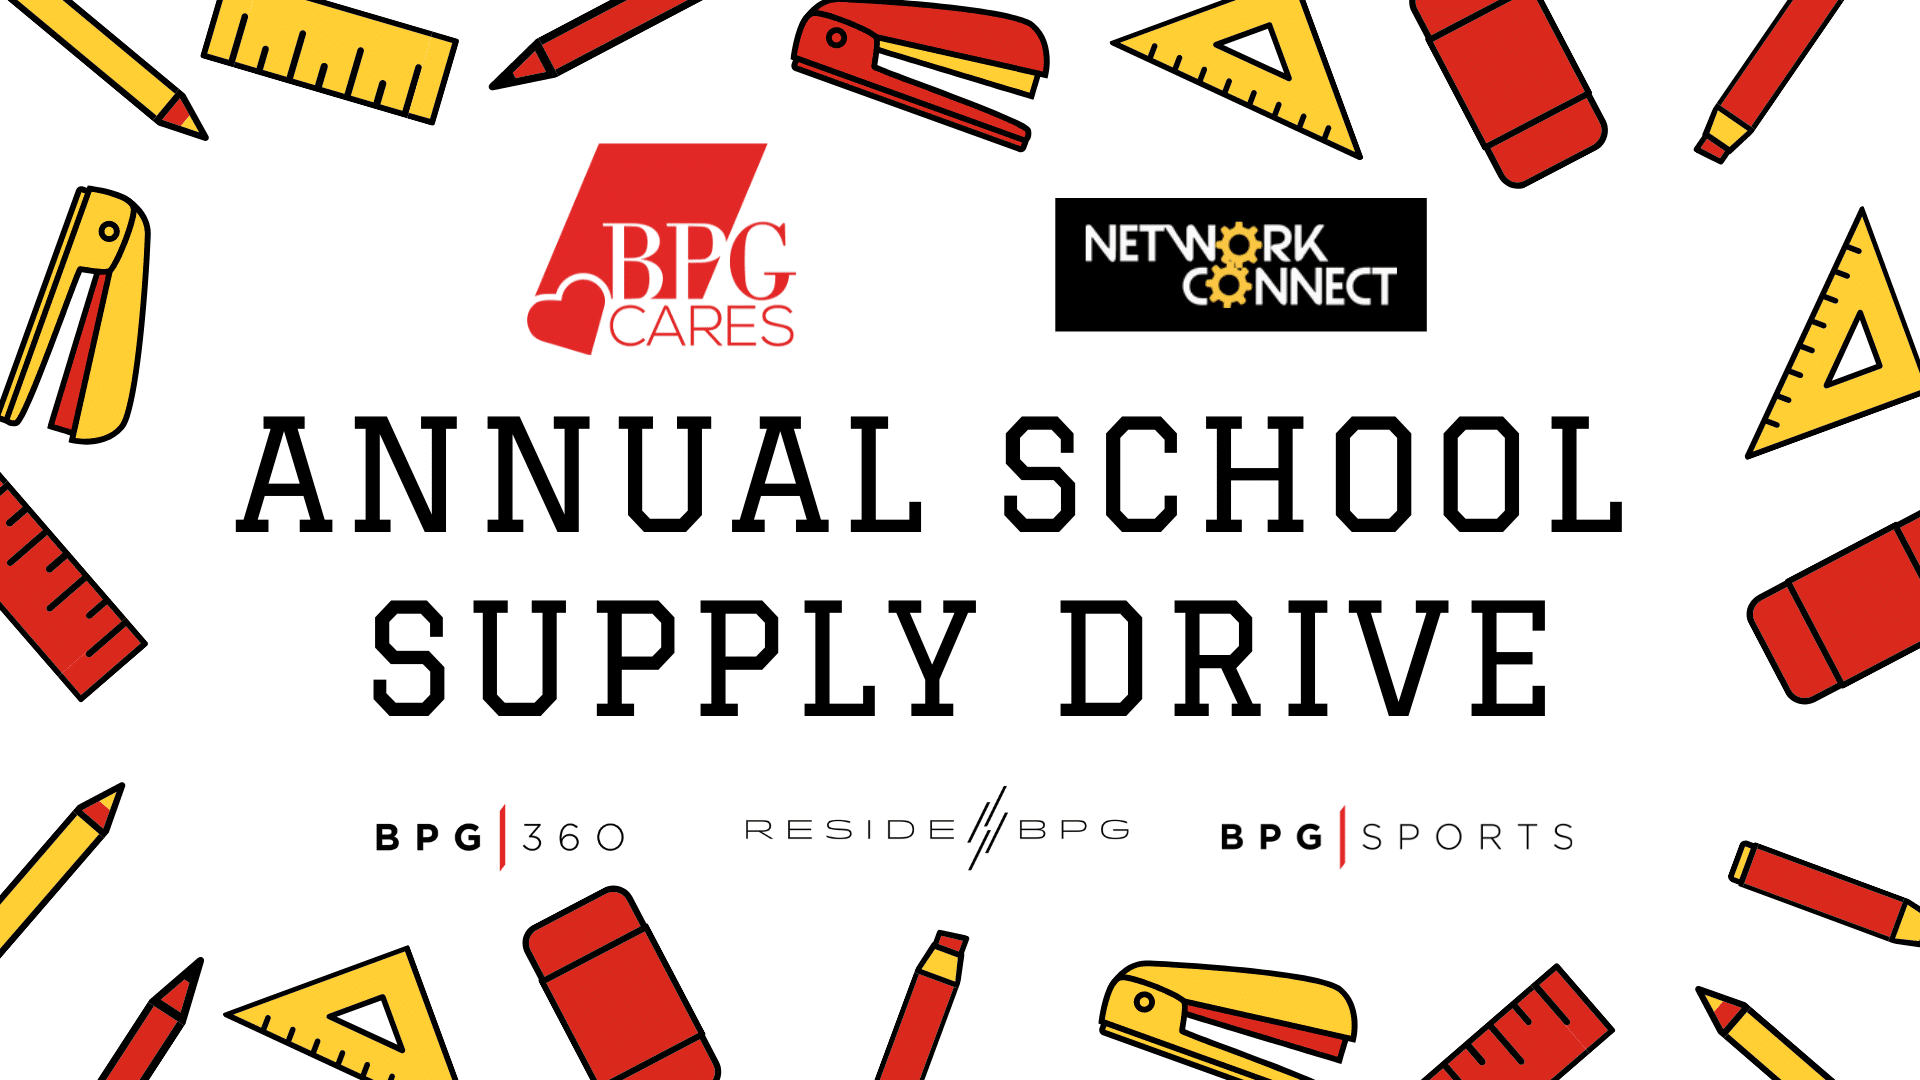 Support Local Students in Need: ResideBPG Annual School Supply Drive